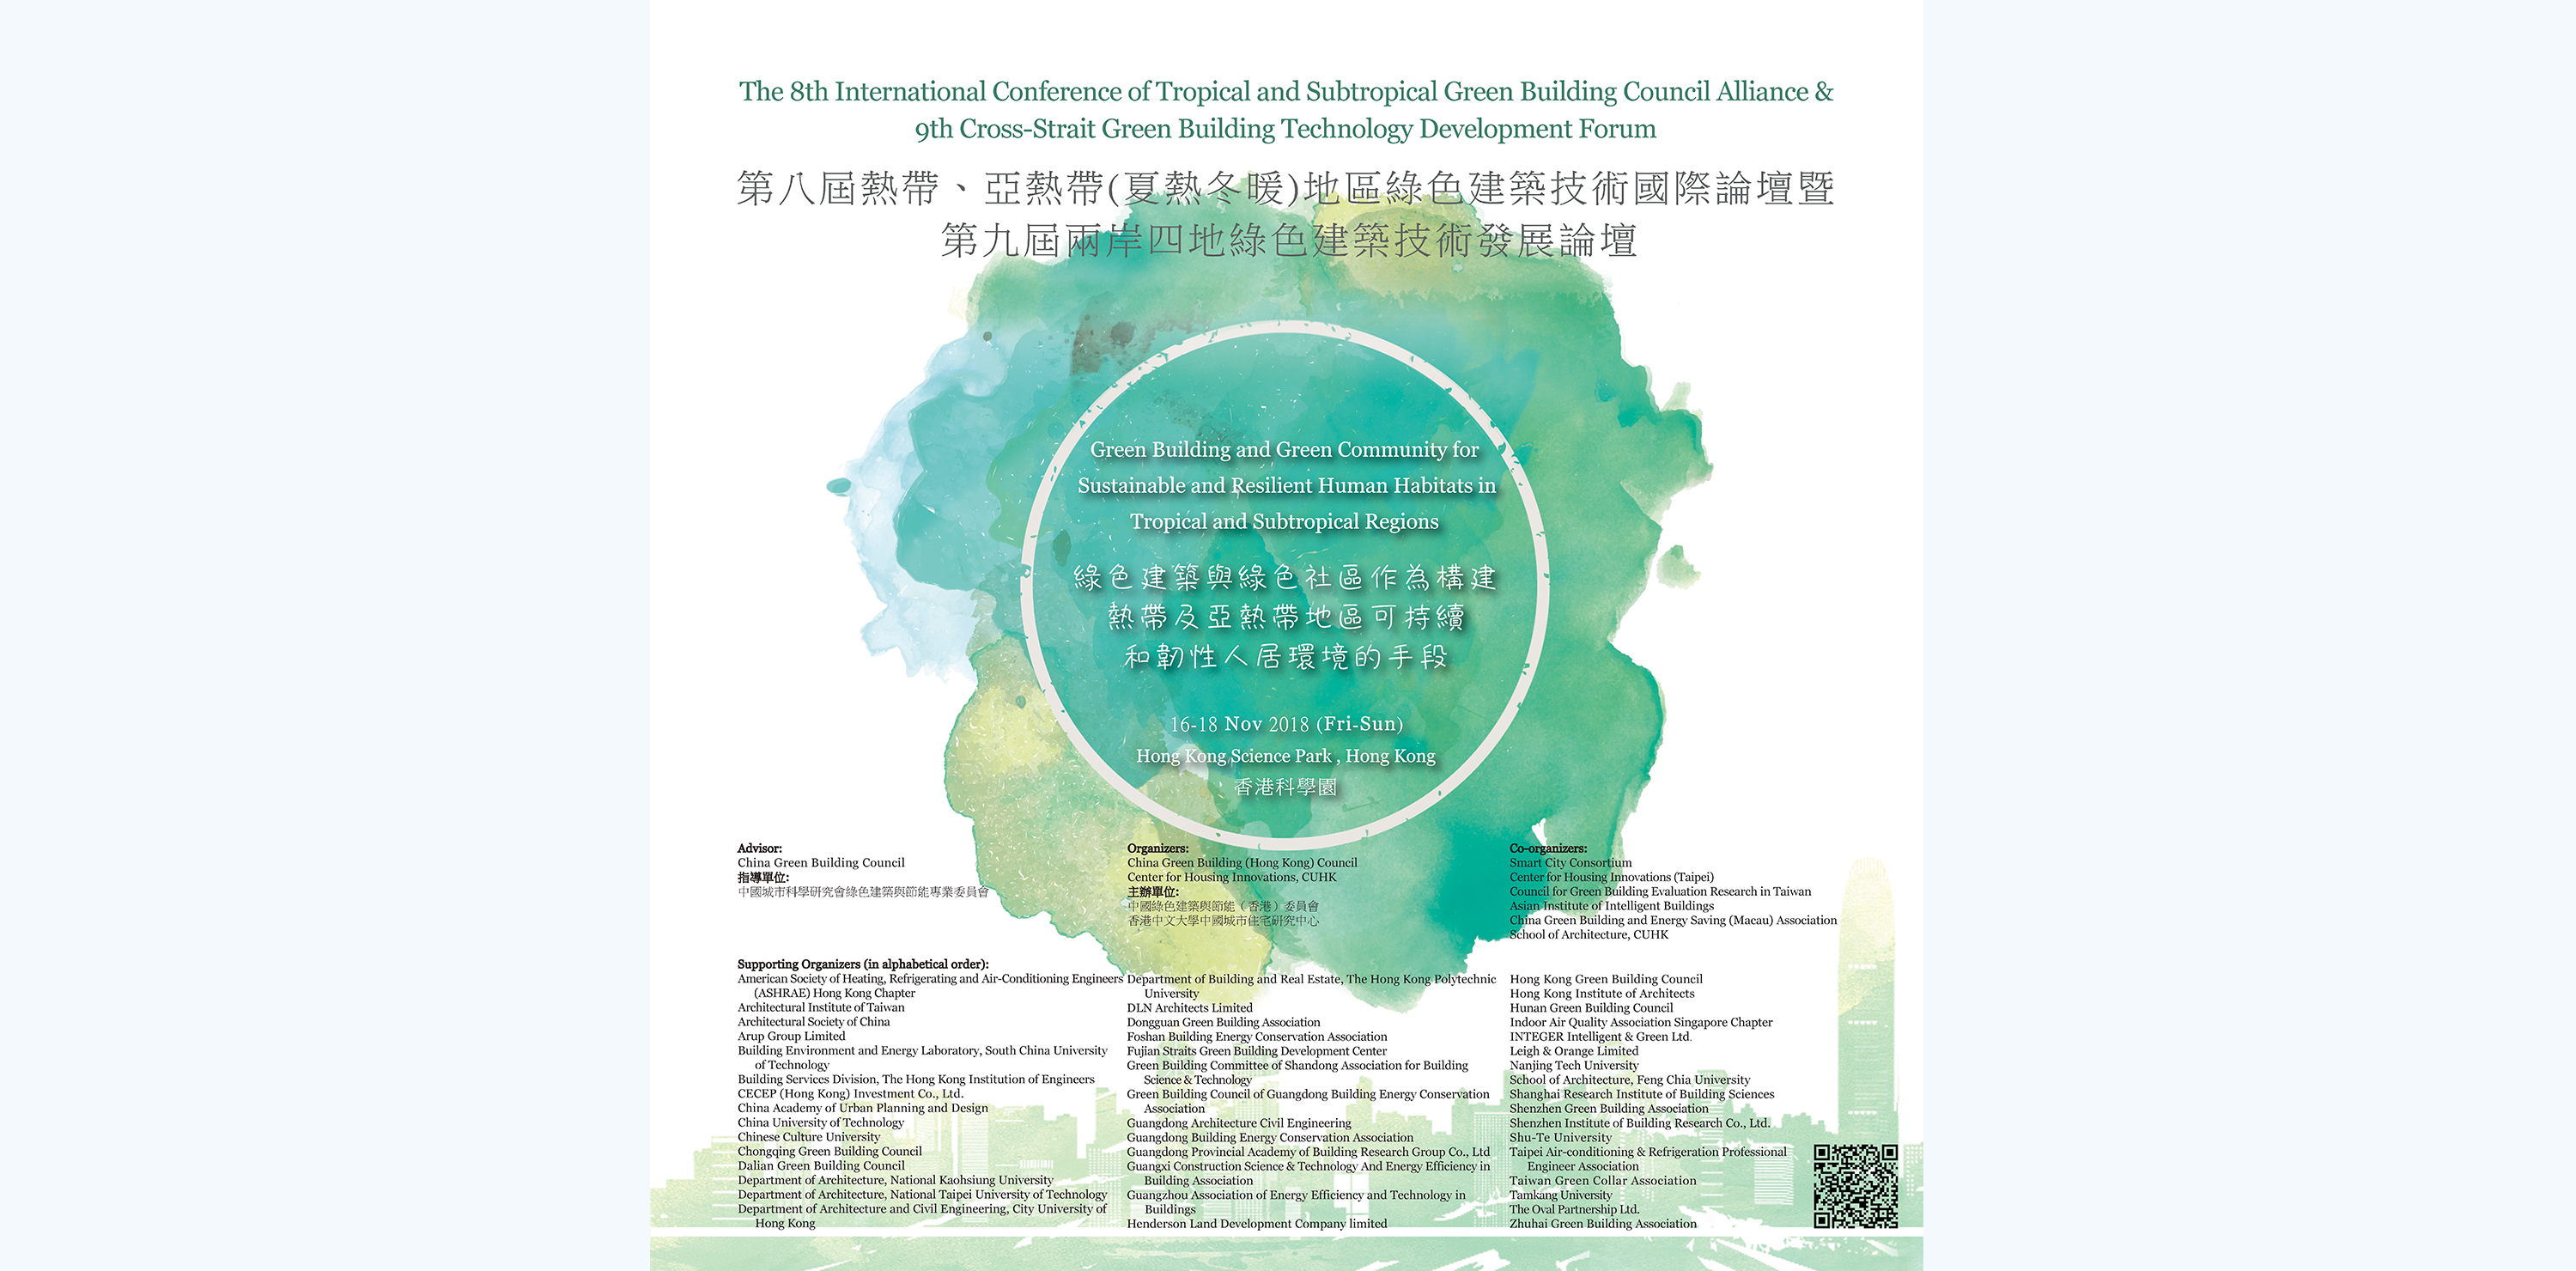 The 8th International Conference of Tropical and Subtropical Green Building Council Alliance & 9th Cross-Strait Green Building Technology Development Forum, 16-18 November 2018